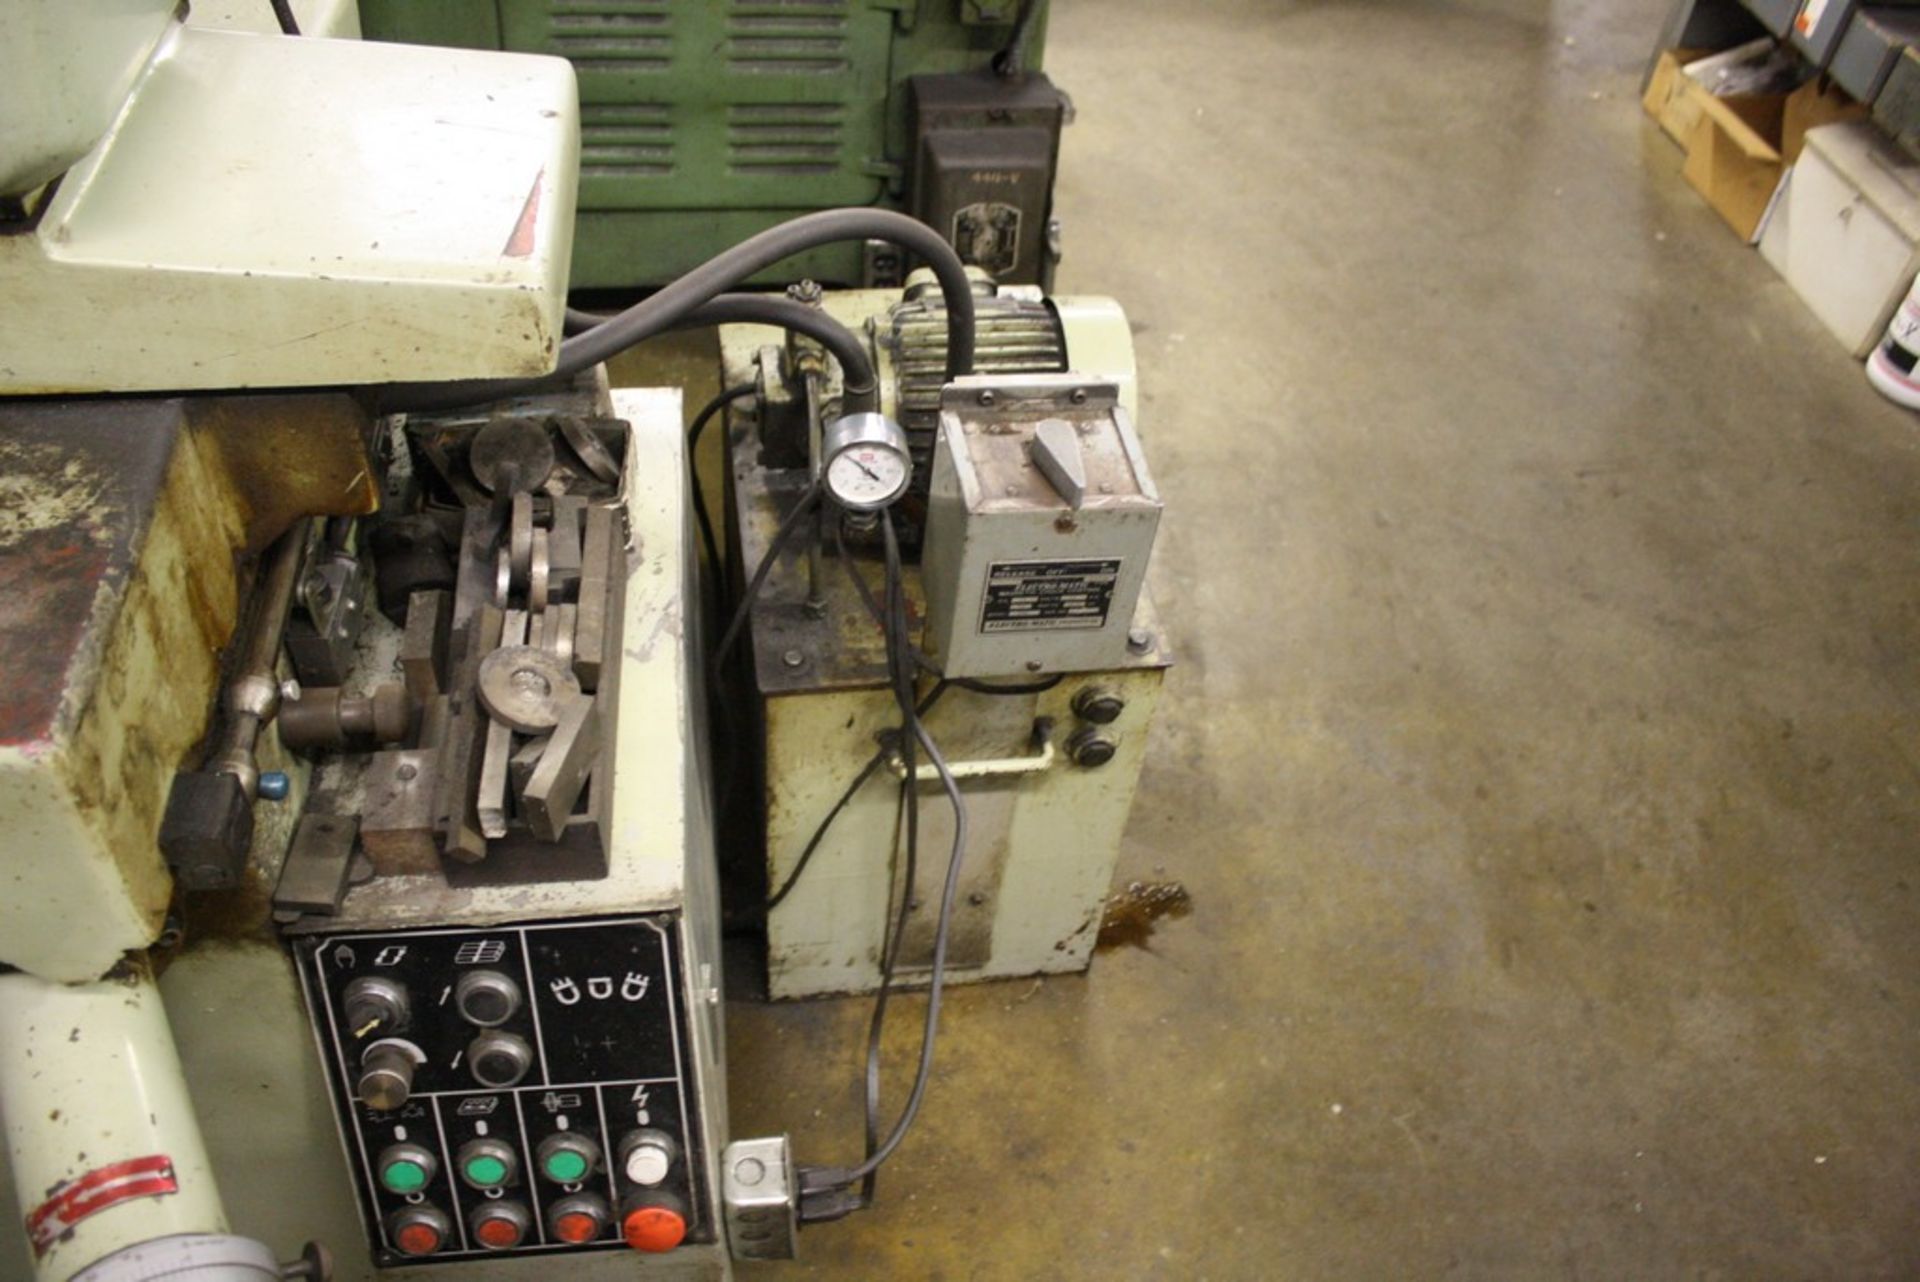 KENT 8" X18" MODEL KSG-250AH HYDRAULIC SURFACE GRINDER, S/N 810834-4, ELECTROMAGNETIC CHUCK, OUTSIDE - Image 6 of 6